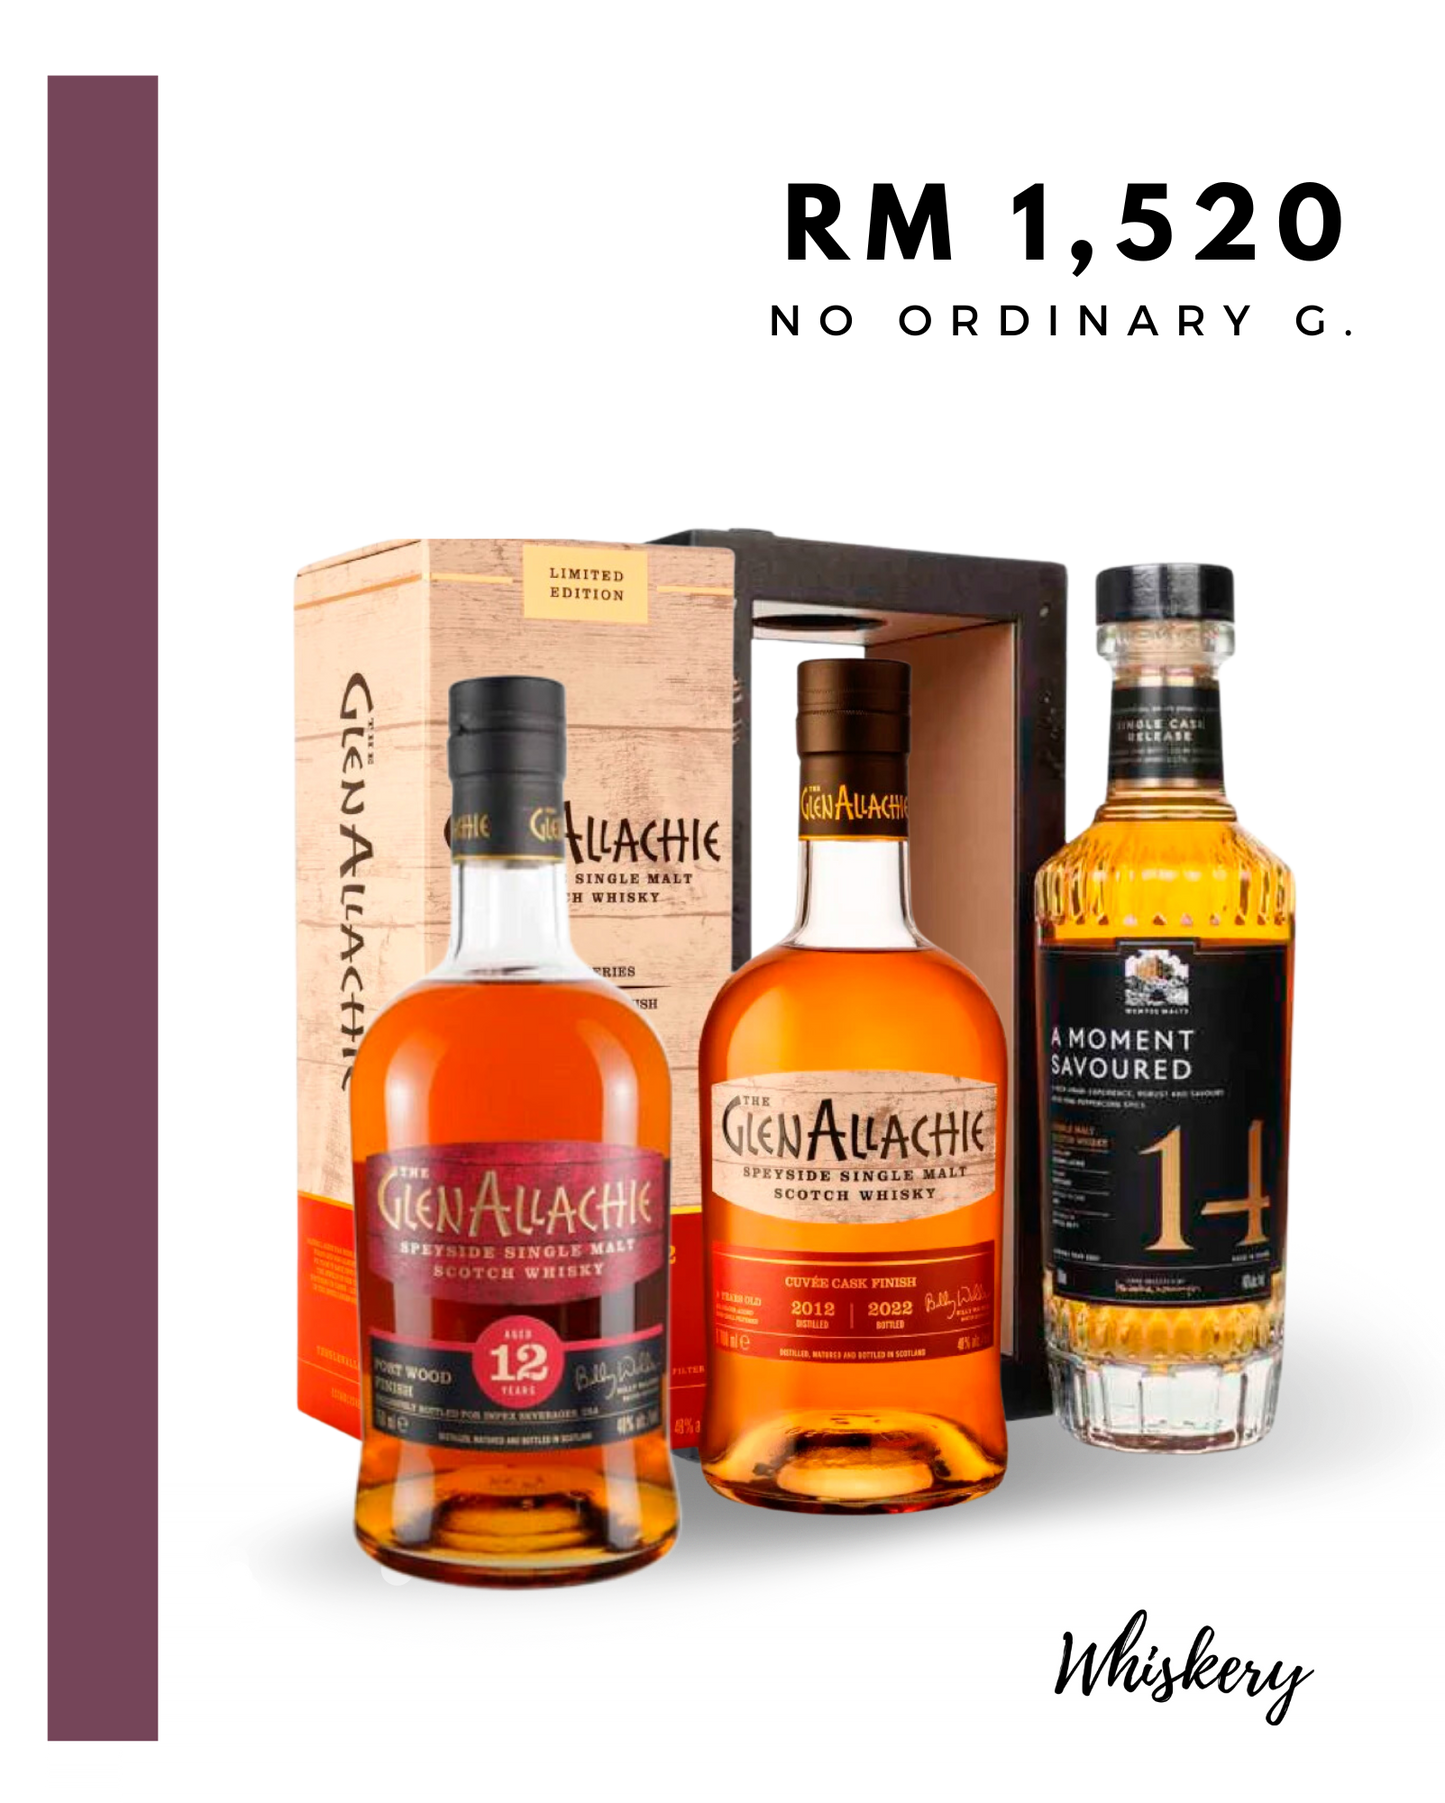 No Ordinary GlenAllachie - Premium Bundle from GlenAllachie - Shop now at Whiskery